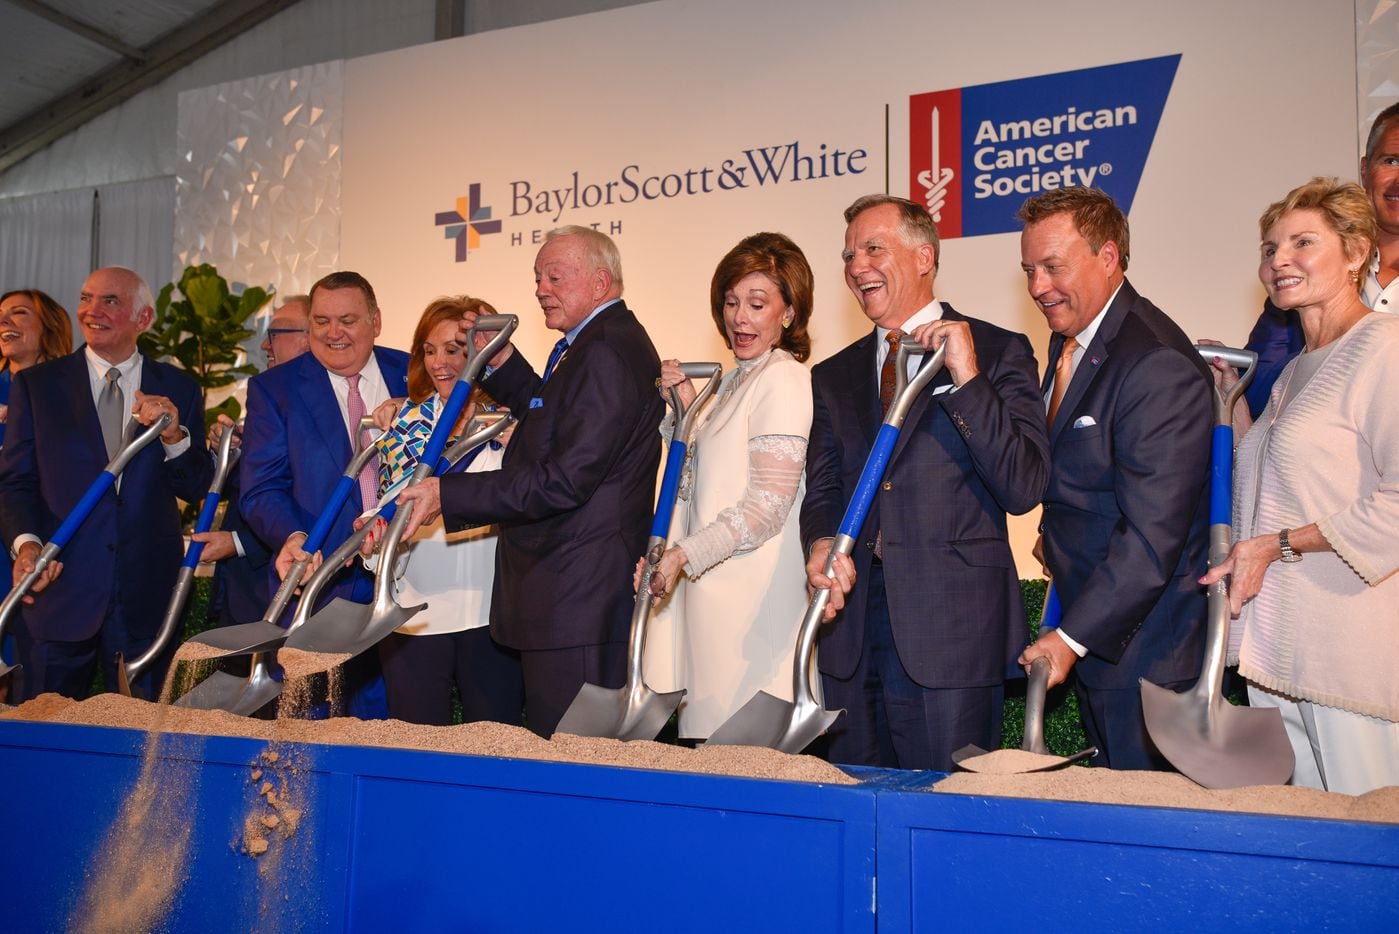 Members of the Jones family, executives from the American Cancer Society, Baylor Scott & White and Baylor's foundation turned ceremonial shovels in May 2019. The Gene and Jerry Jones Family Hope Lodge recently welcomed its first three patients.